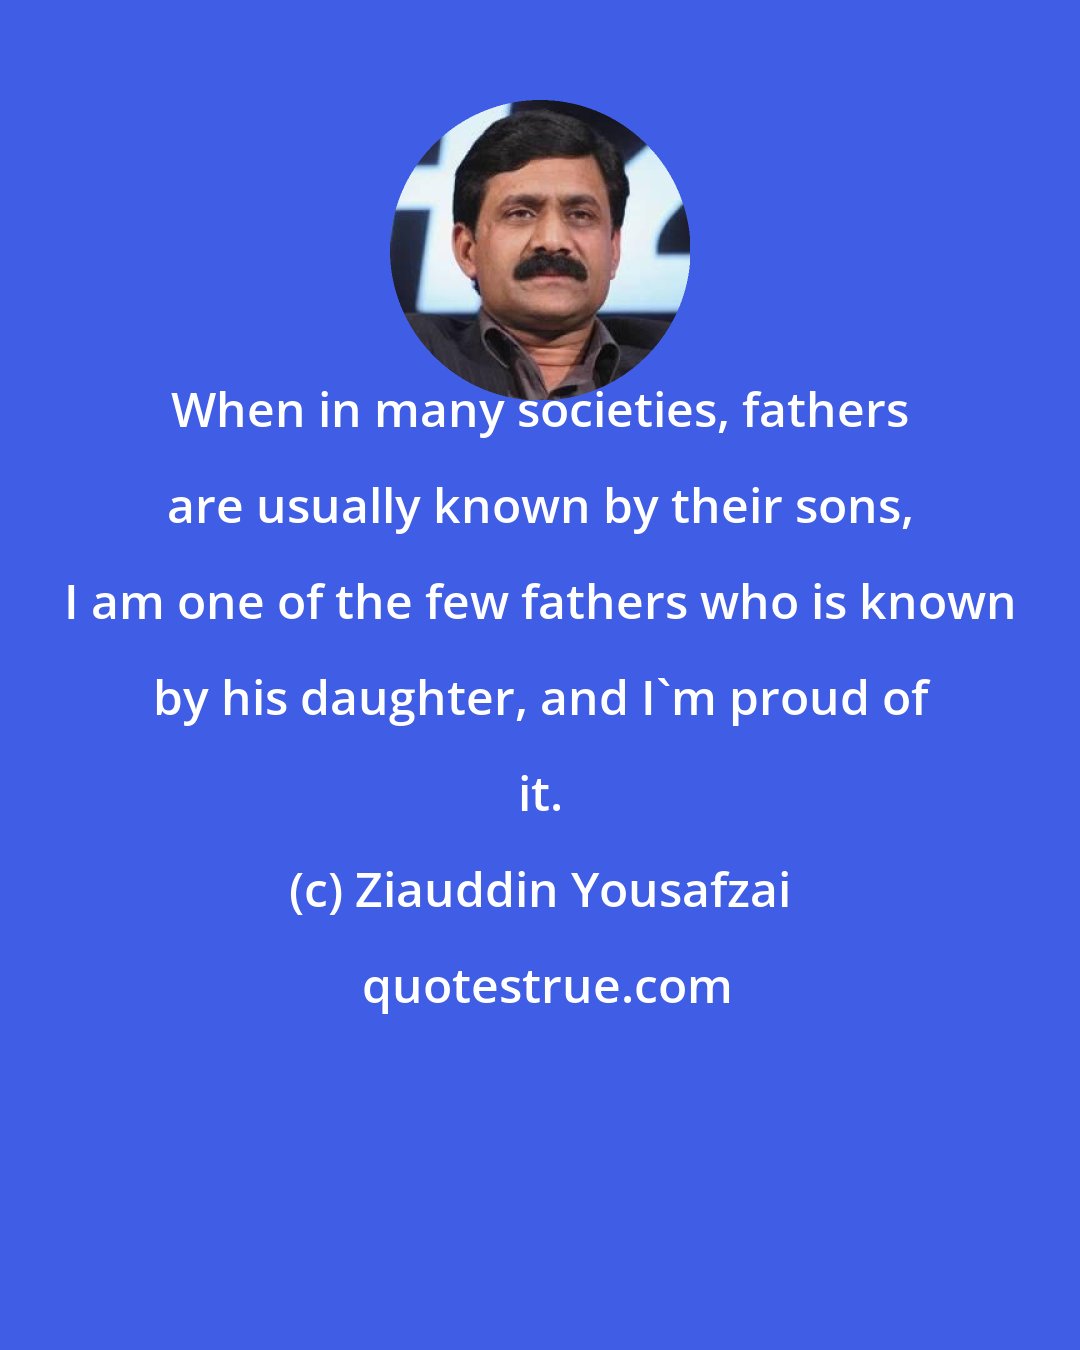 Ziauddin Yousafzai: When in many societies, fathers are usually known by their sons, I am one of the few fathers who is known by his daughter, and I'm proud of it.